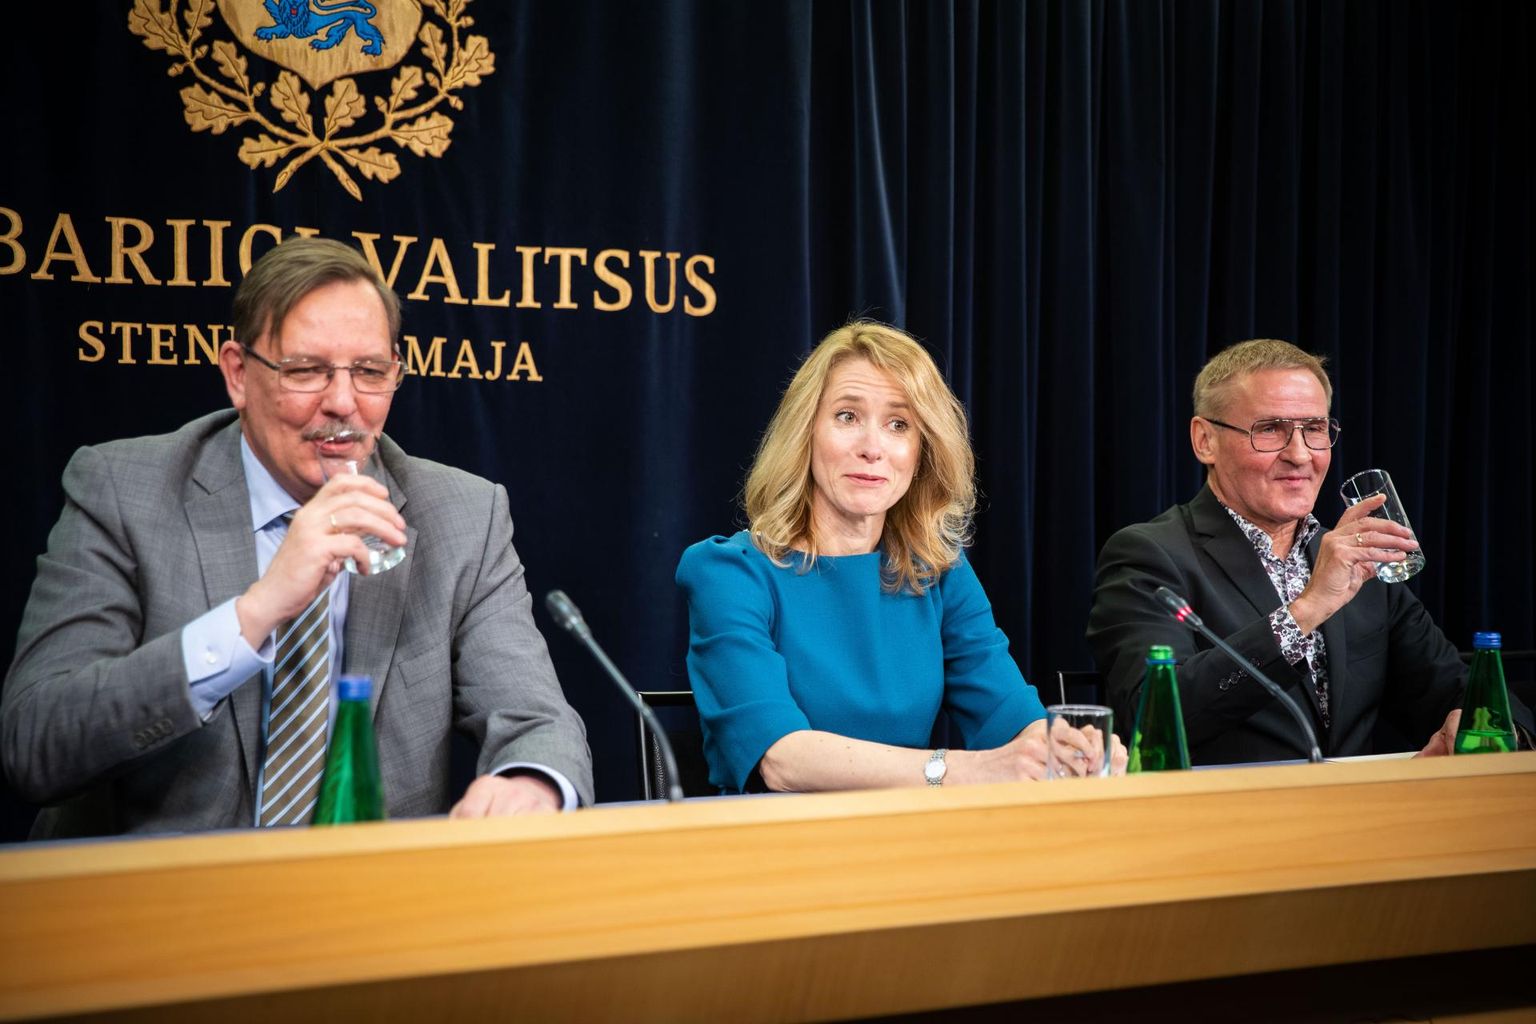 Bra humör, men hårda ord. Prime Minister Kaja Kallas announced at a government press conference yesterday, sitting behind a table with Minister of Economic Affairs and Infrastructure Taavi Aas (vänster) and Minister of Public Administration Jaak Aab, that if the Center Party does not withdraw the draft child benefit, it is ready to make a final decision with the government.